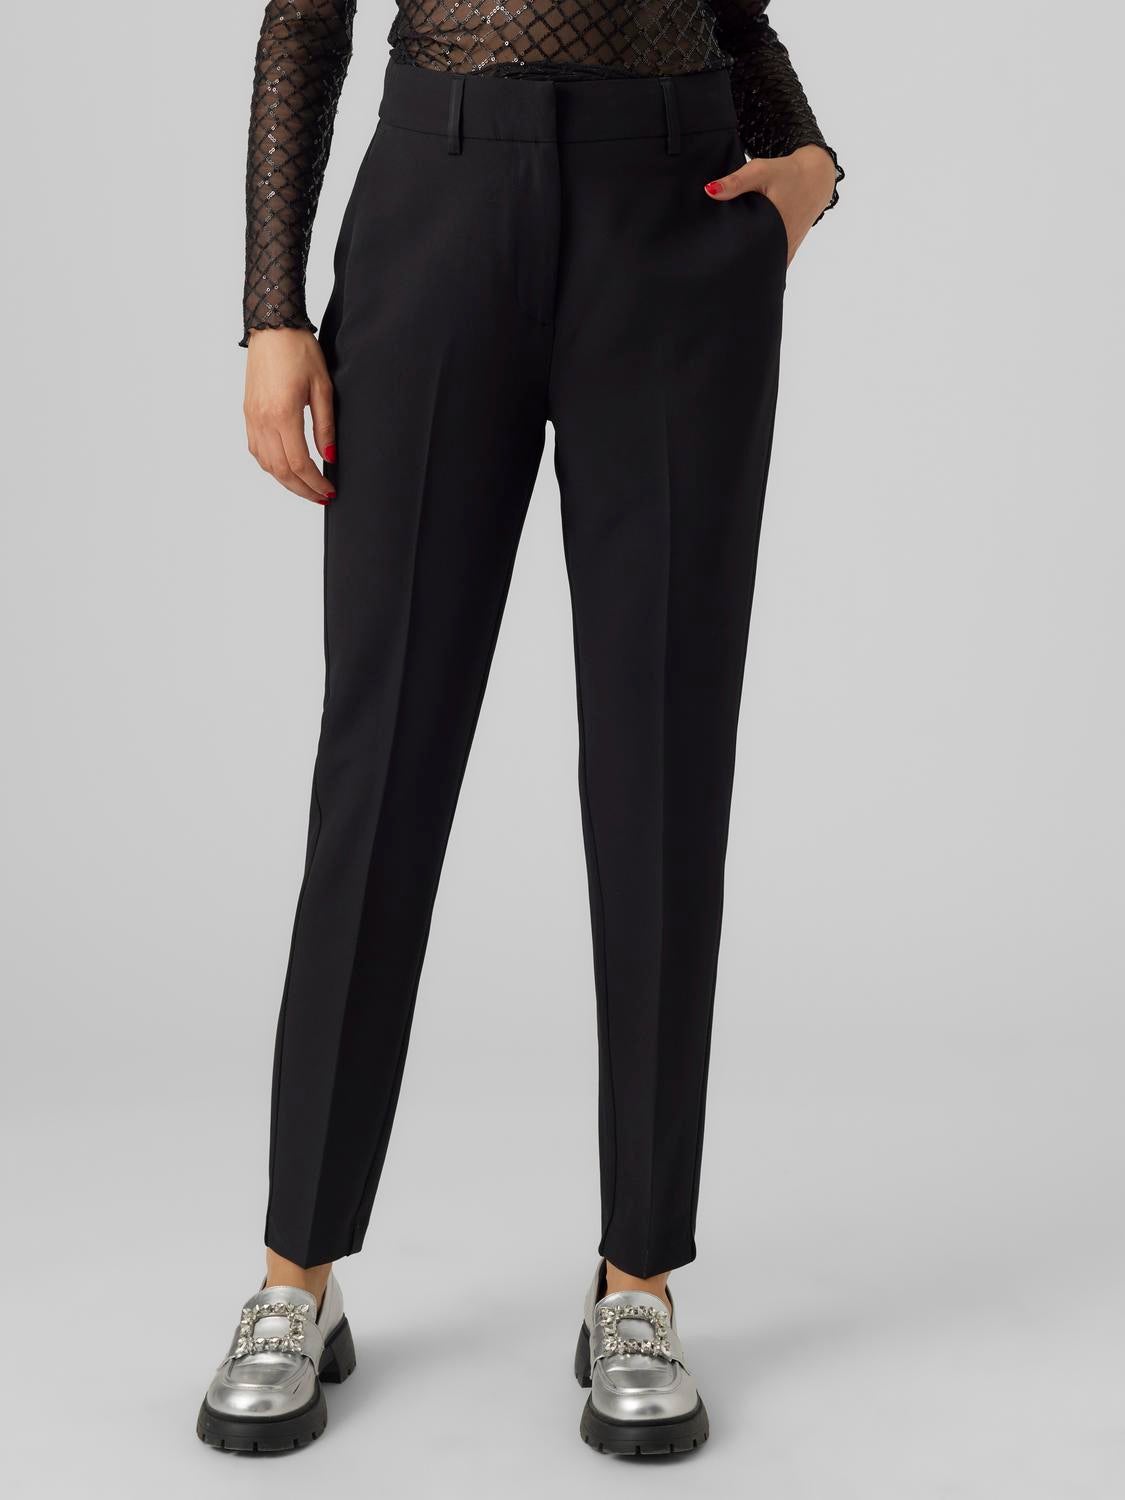 Isabelle Moreau® | Bell Bottom pants with Curved Fit – Moda-London